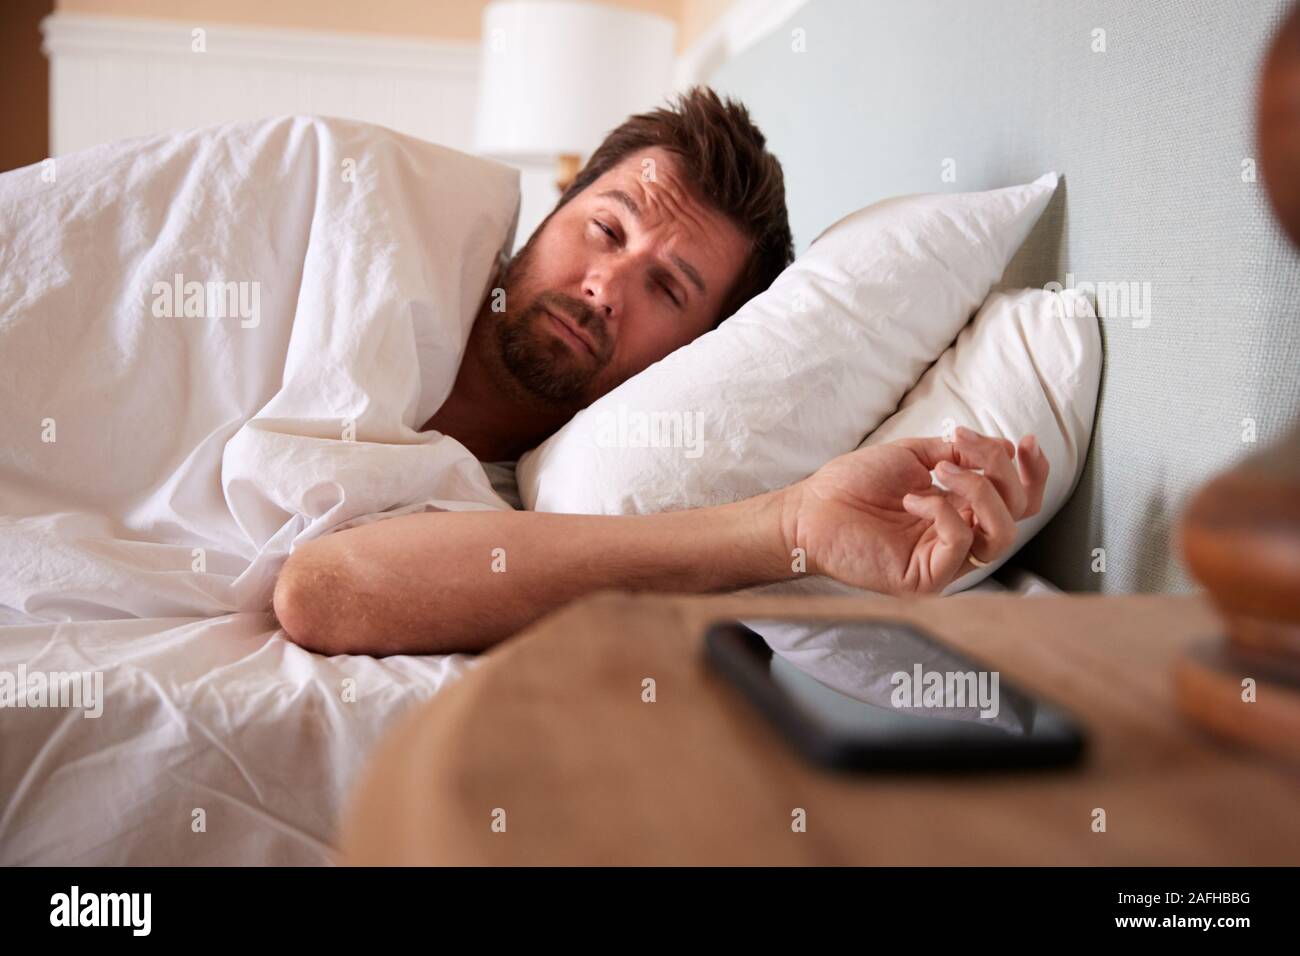 Mid adult man asleep in bed, looking at the smartphone on the bedside table in the foreground Stock Photo